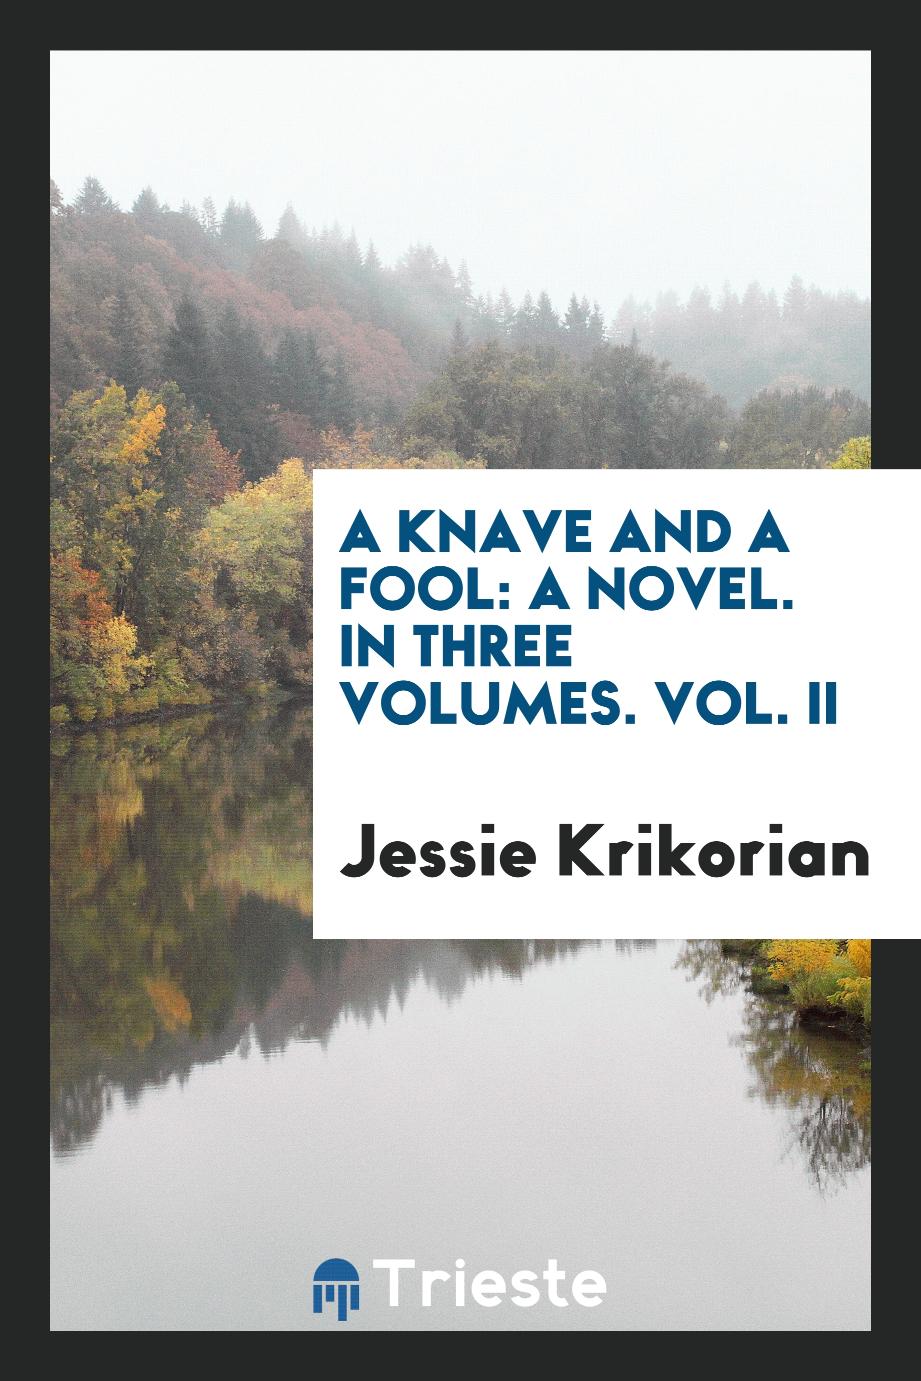 A Knave and a Fool: A Novel. In Three Volumes. Vol. II